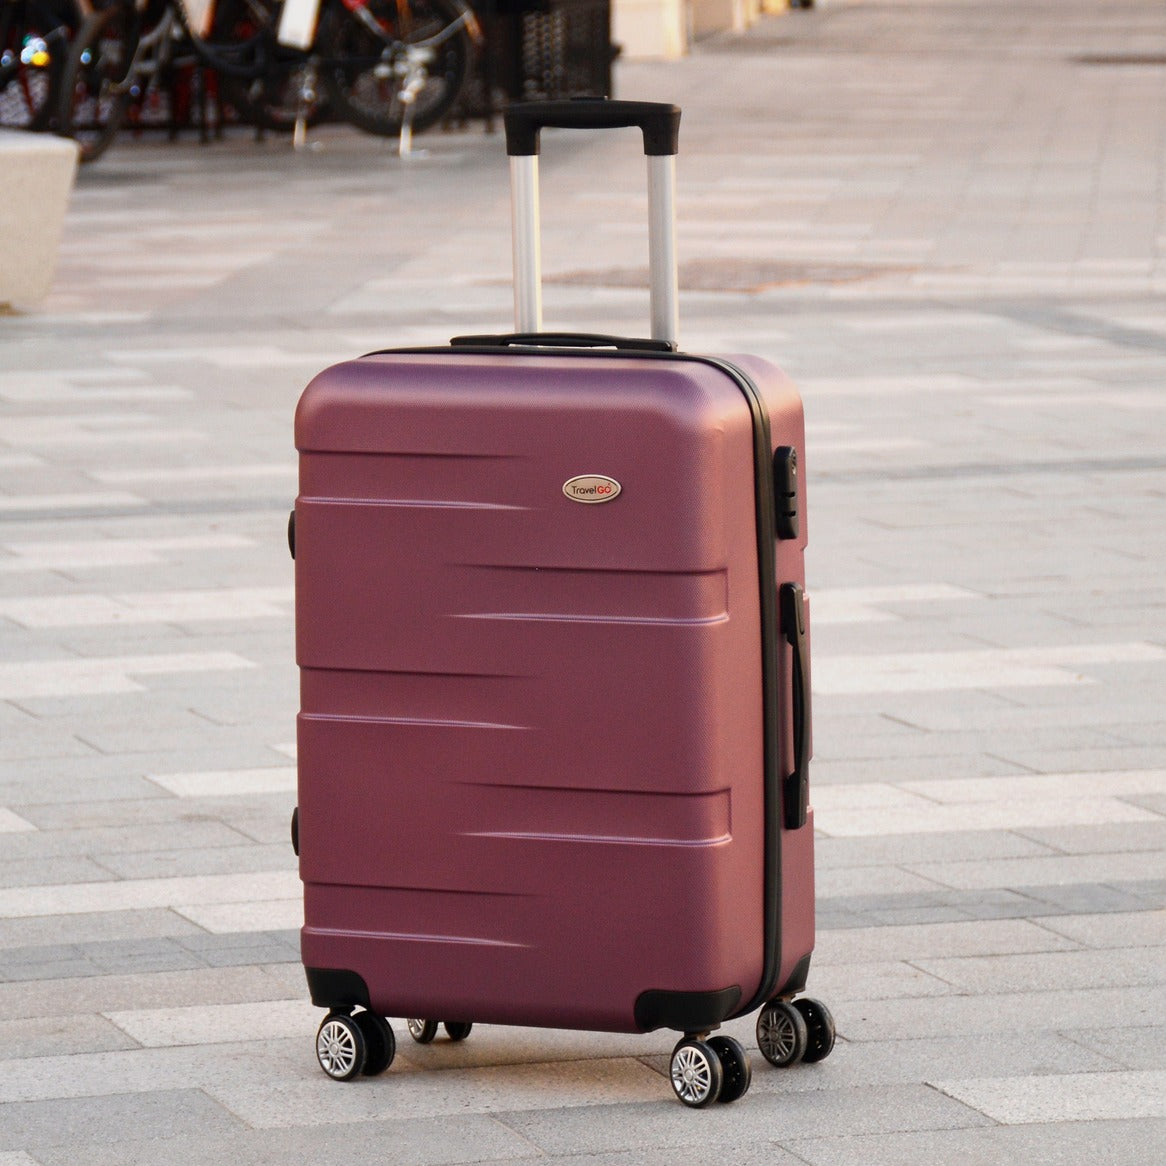 24" Purplish Red Colour JIAN ABS 559 Luggage Lightweight Hard Case Trolley Bag With Spinner Wheel Zaappy.com